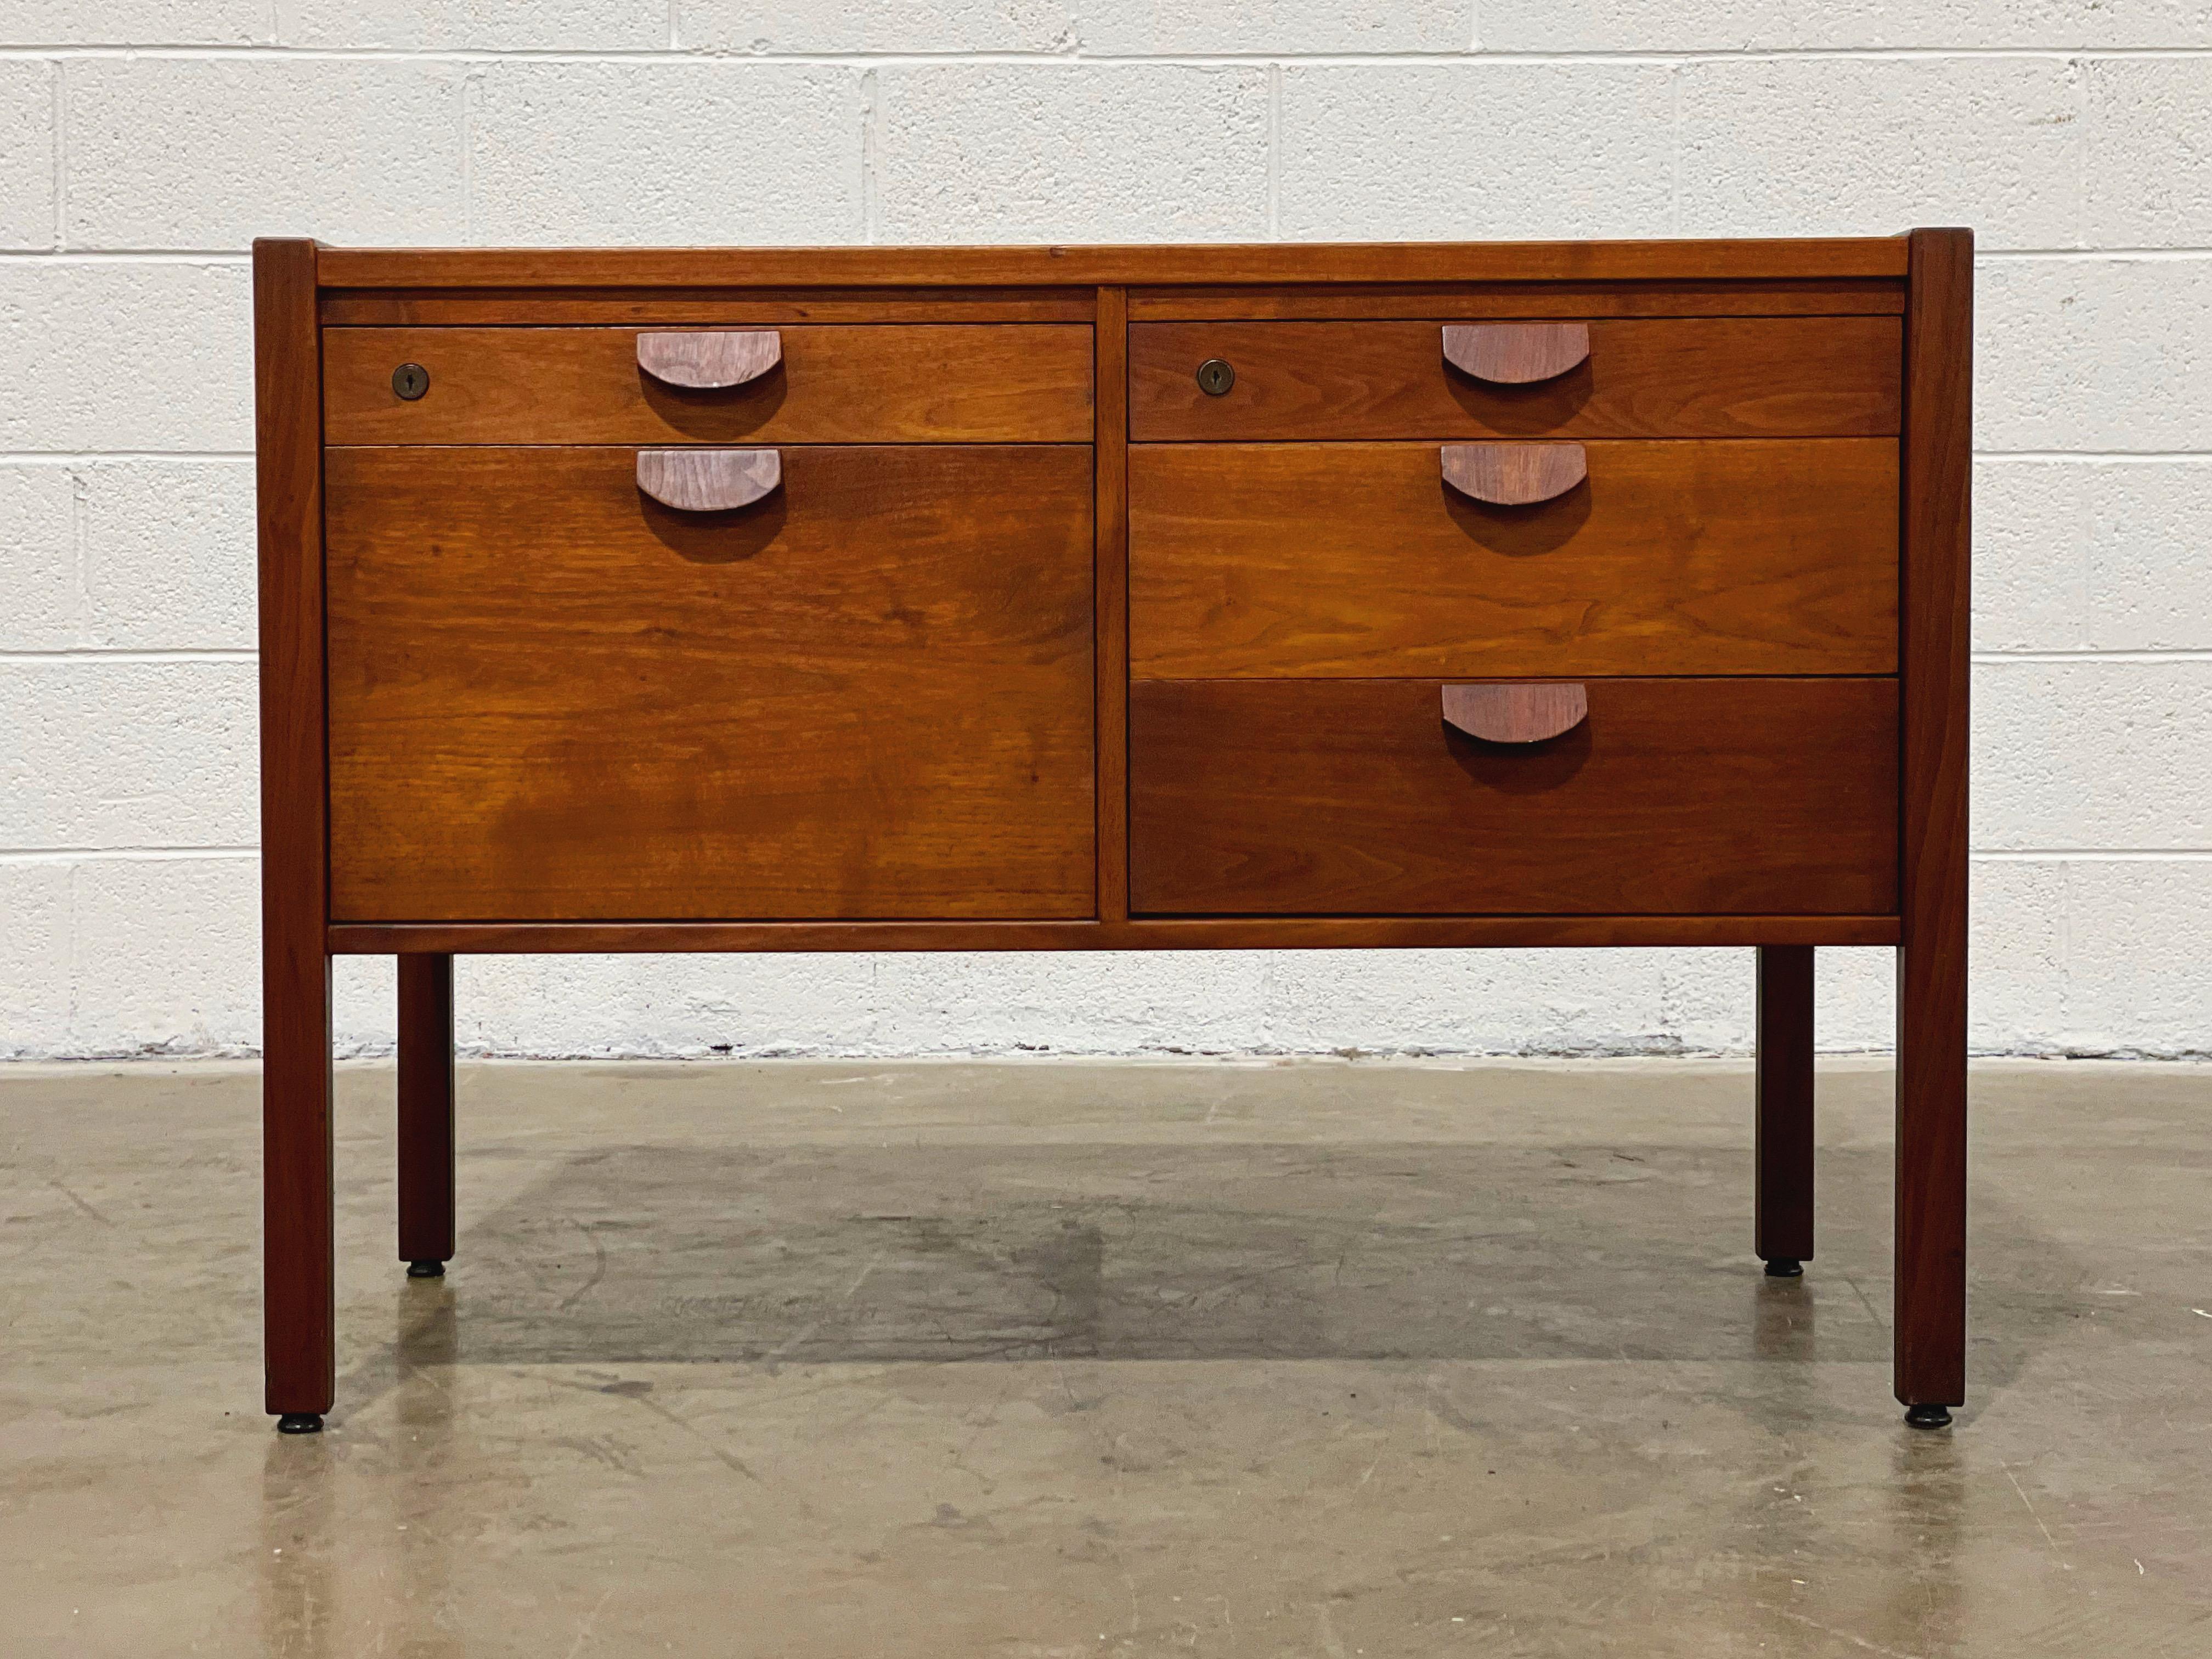 Mid-century credenza filing cabinet by Jens Risom in American black walnut, circa 1965. Desirable solid walnut 